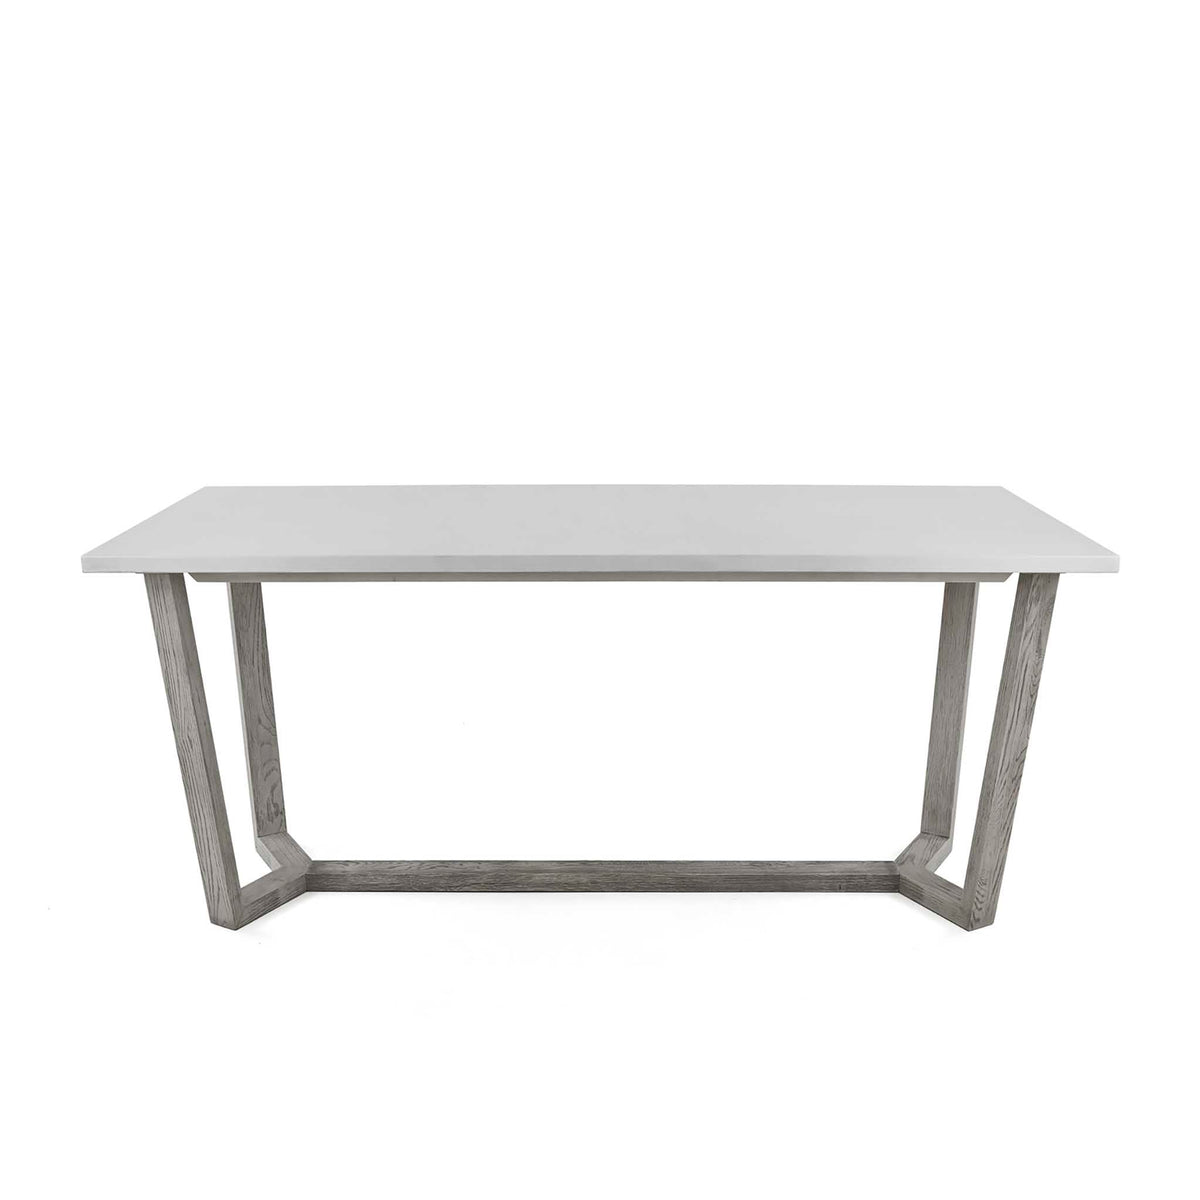 front view of the Epsom 150cm Rectangular Dining Table